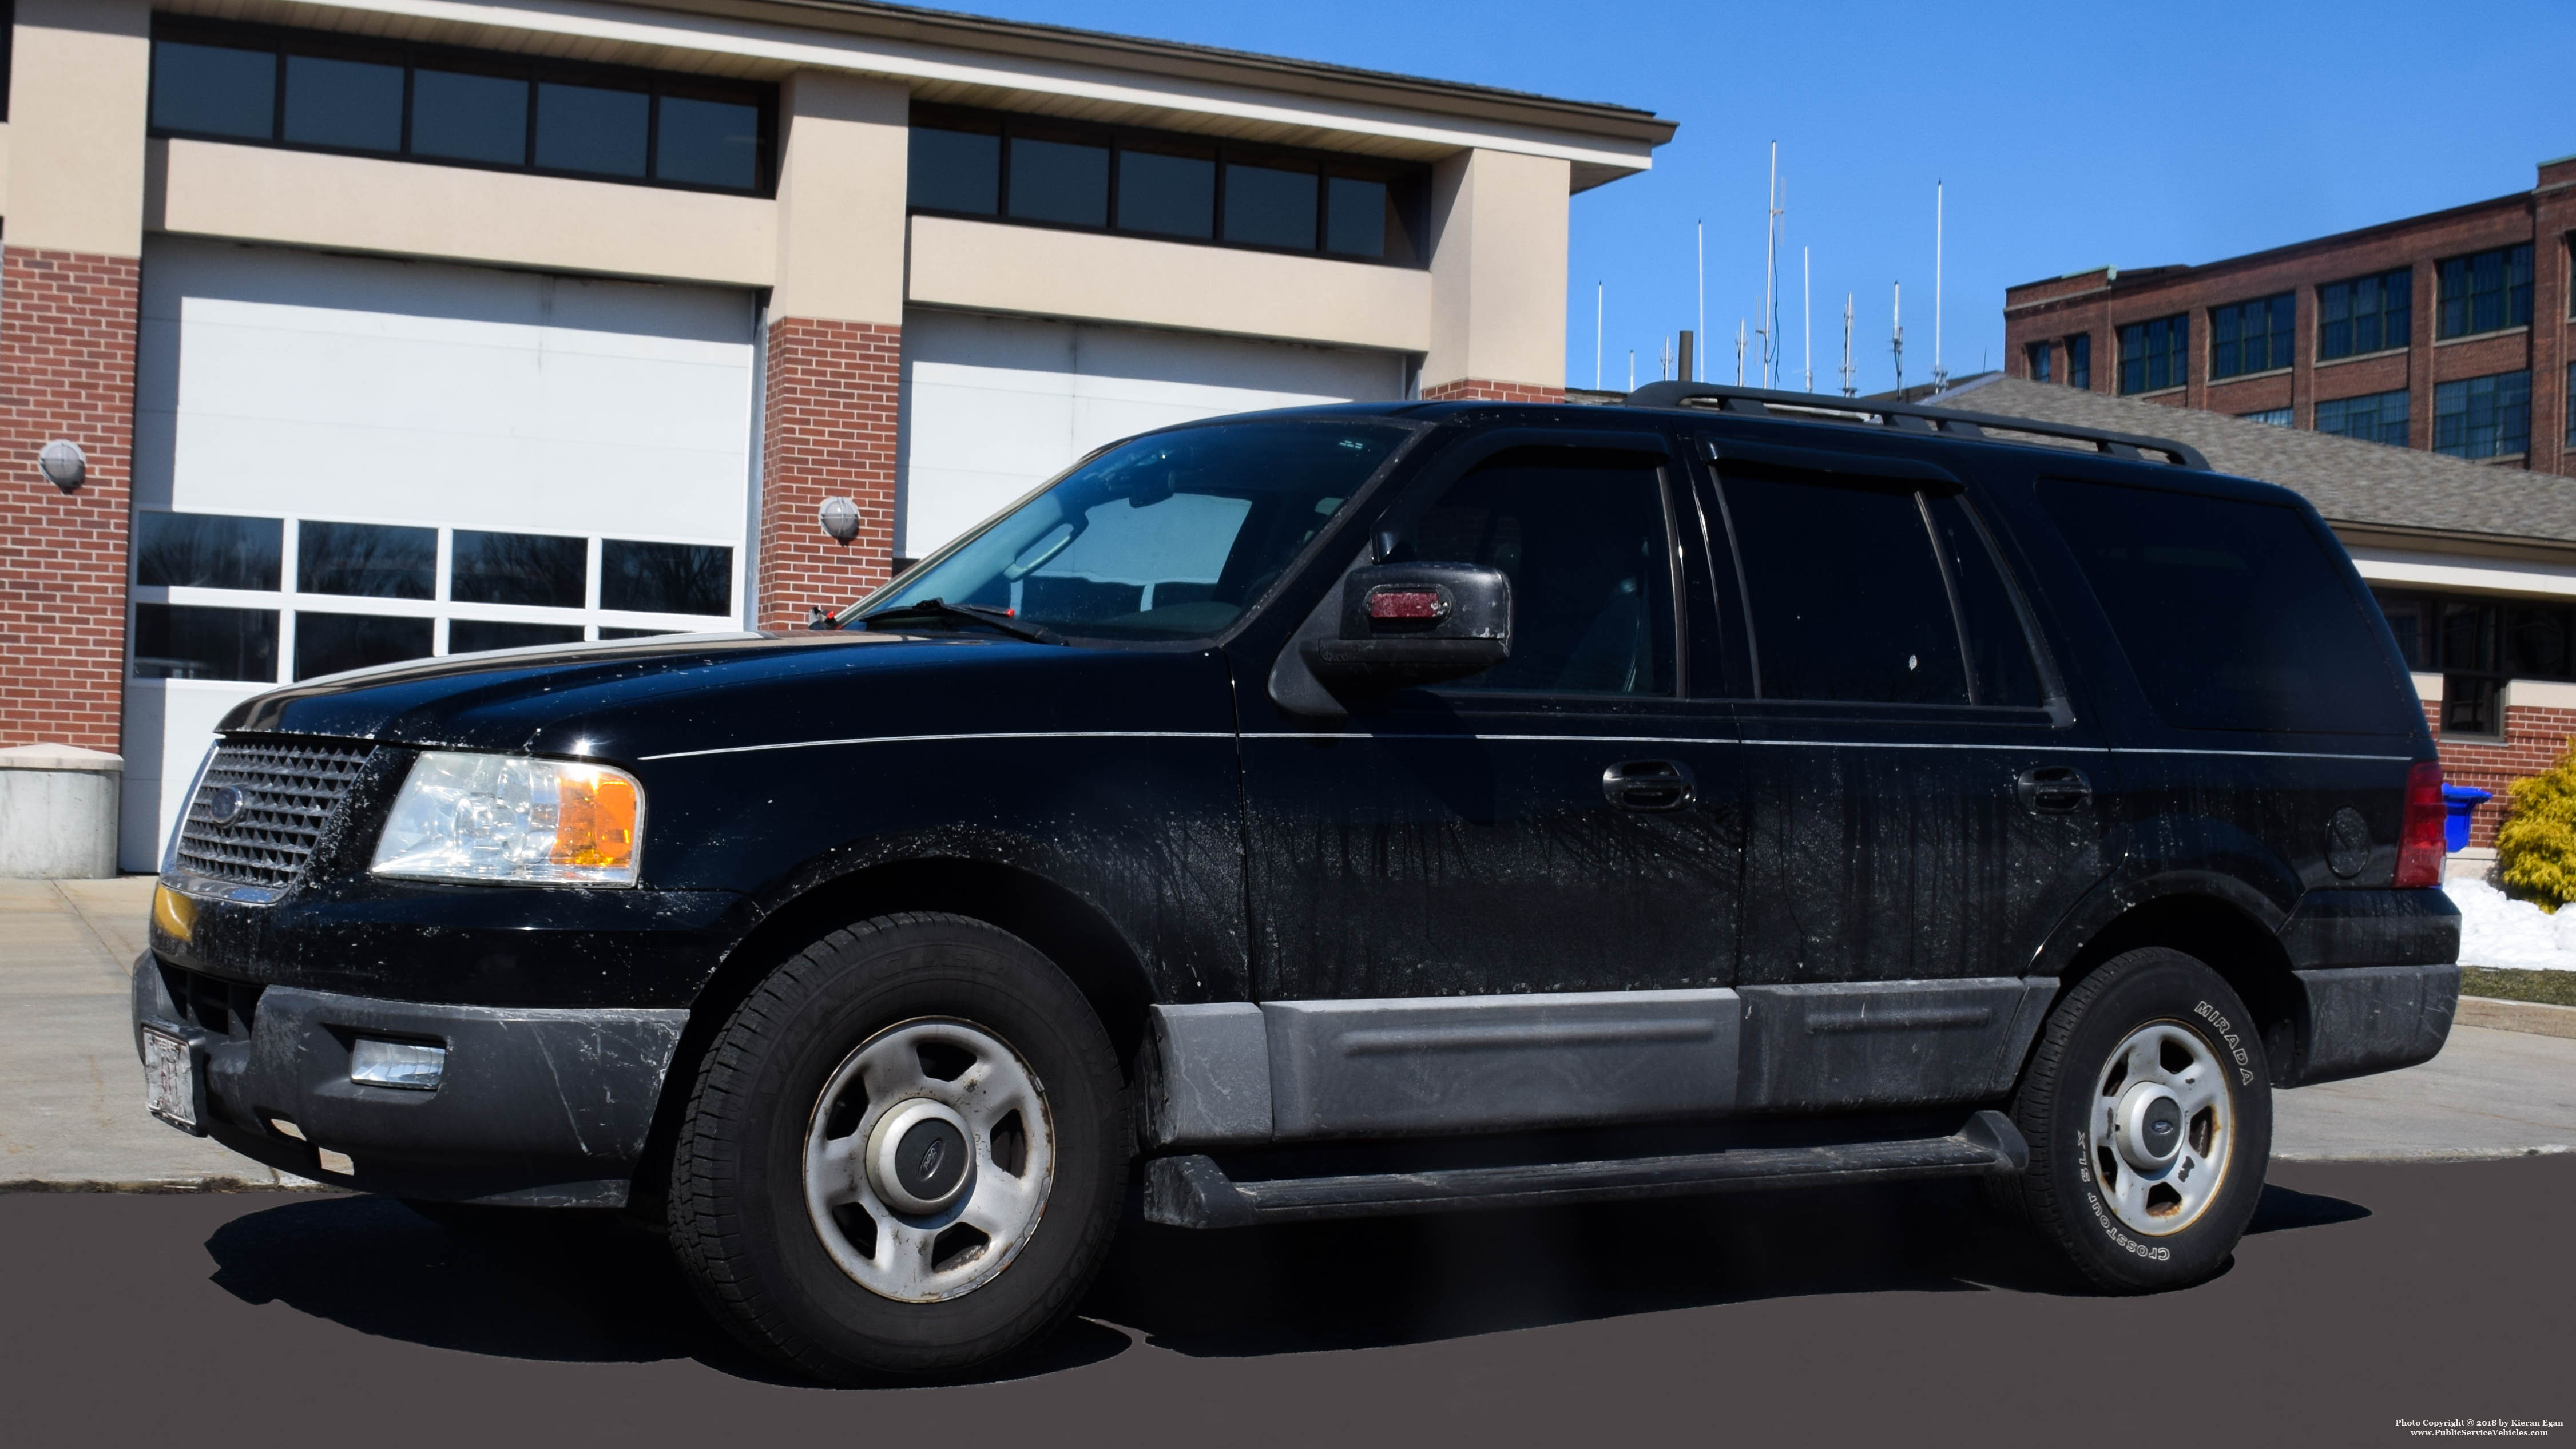 A photo  of East Providence Fire
            Car 33, a 2003-2006 Ford Expedition             taken by Kieran Egan